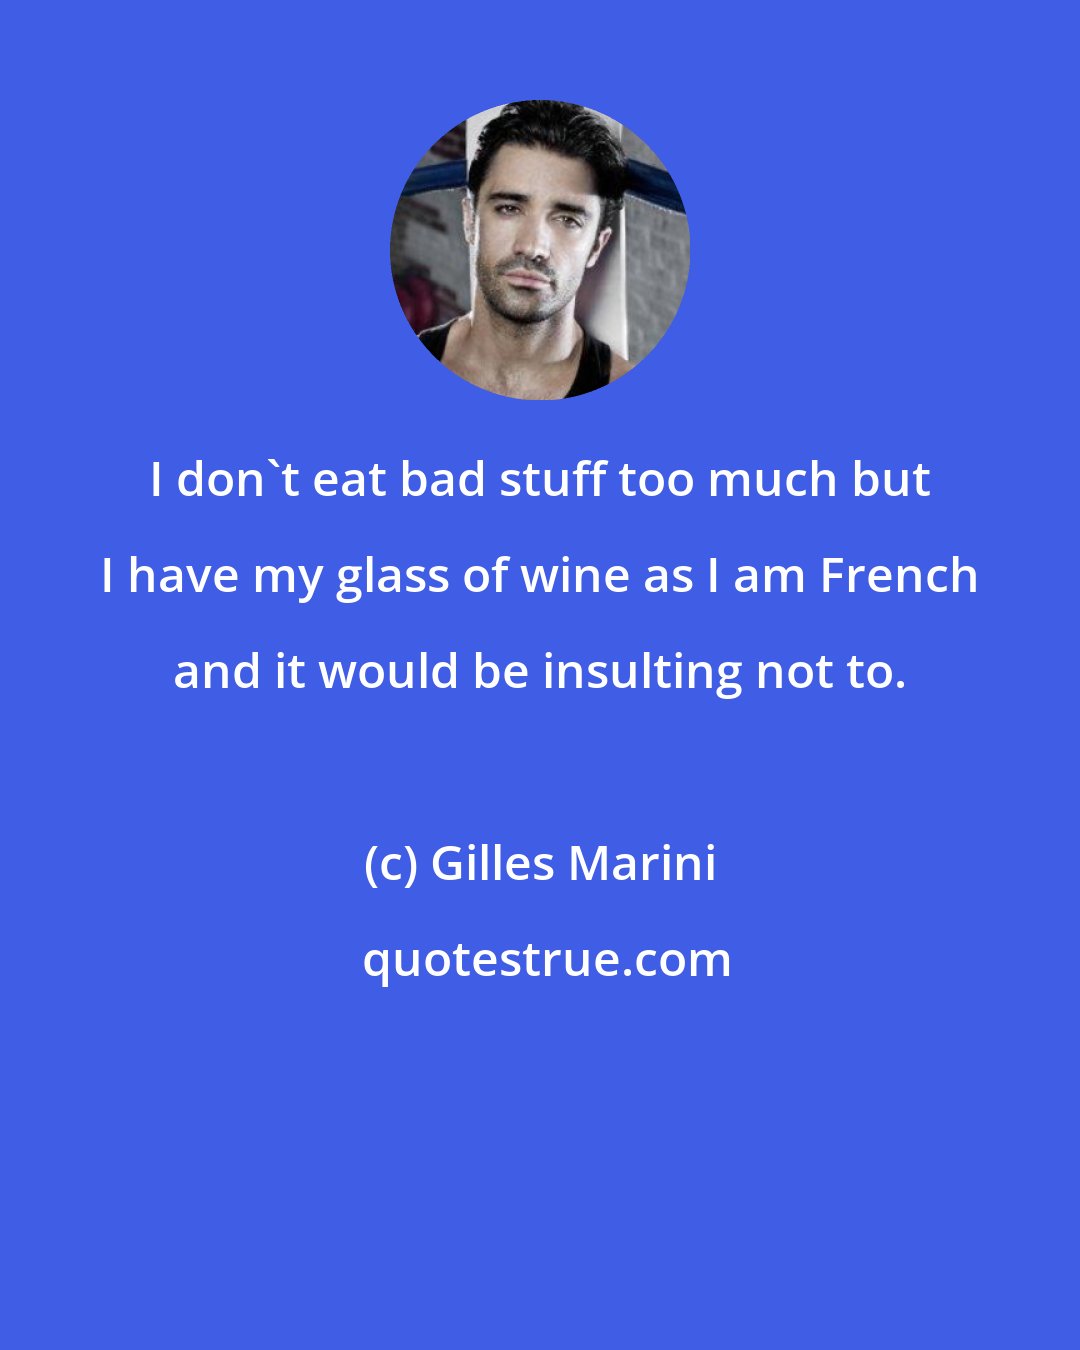 Gilles Marini: I don't eat bad stuff too much but I have my glass of wine as I am French and it would be insulting not to.